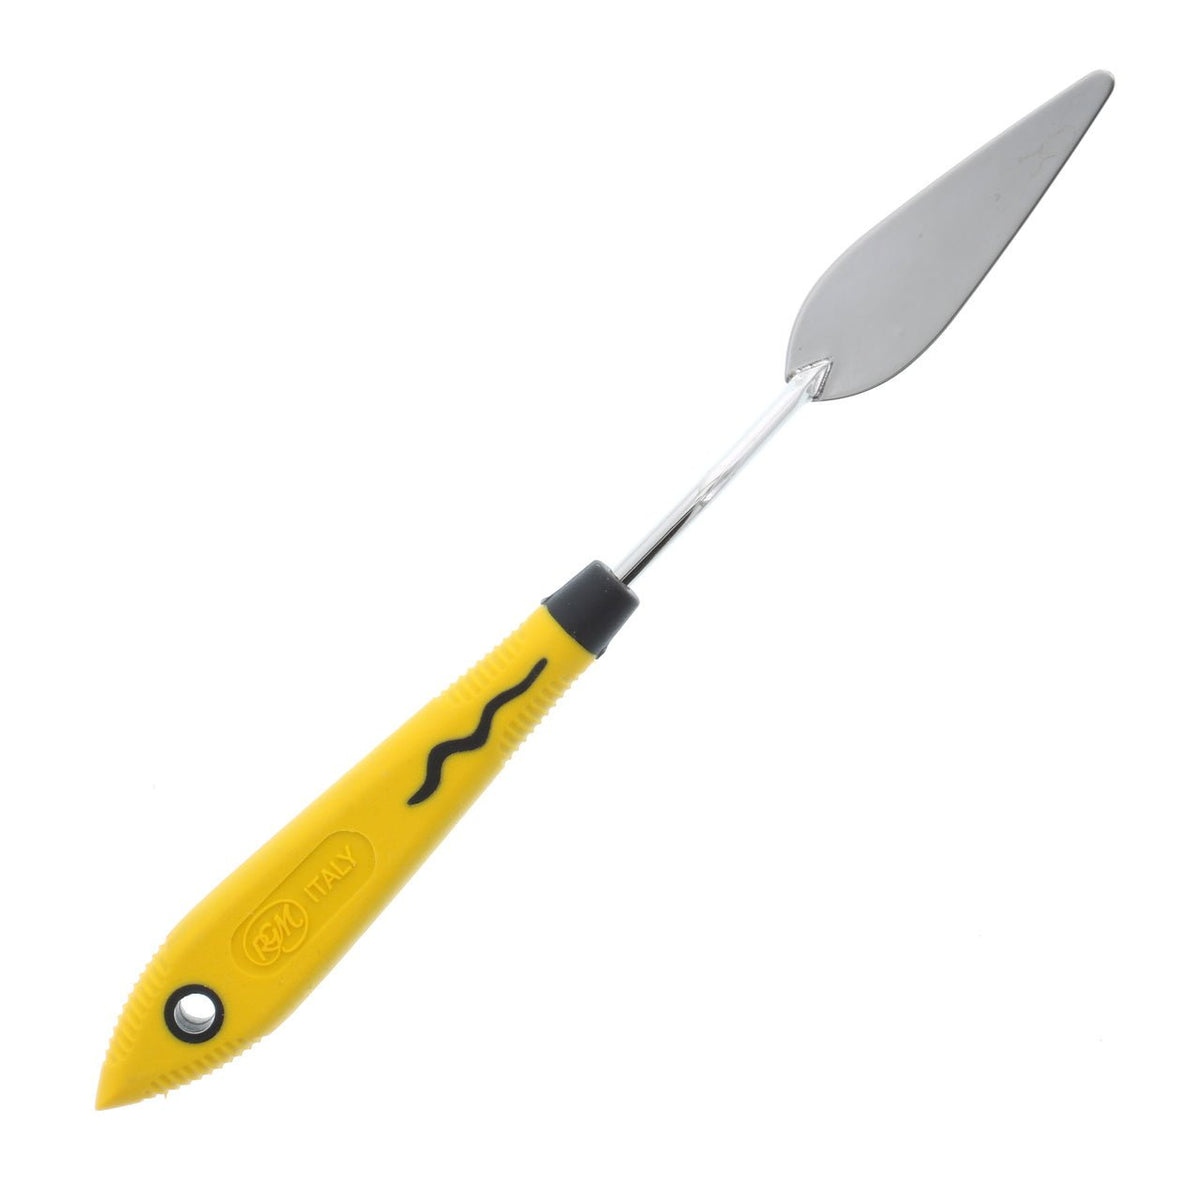 RGM Soft Grip Painting Knife #010 (Yellow Handle) - merriartist.com